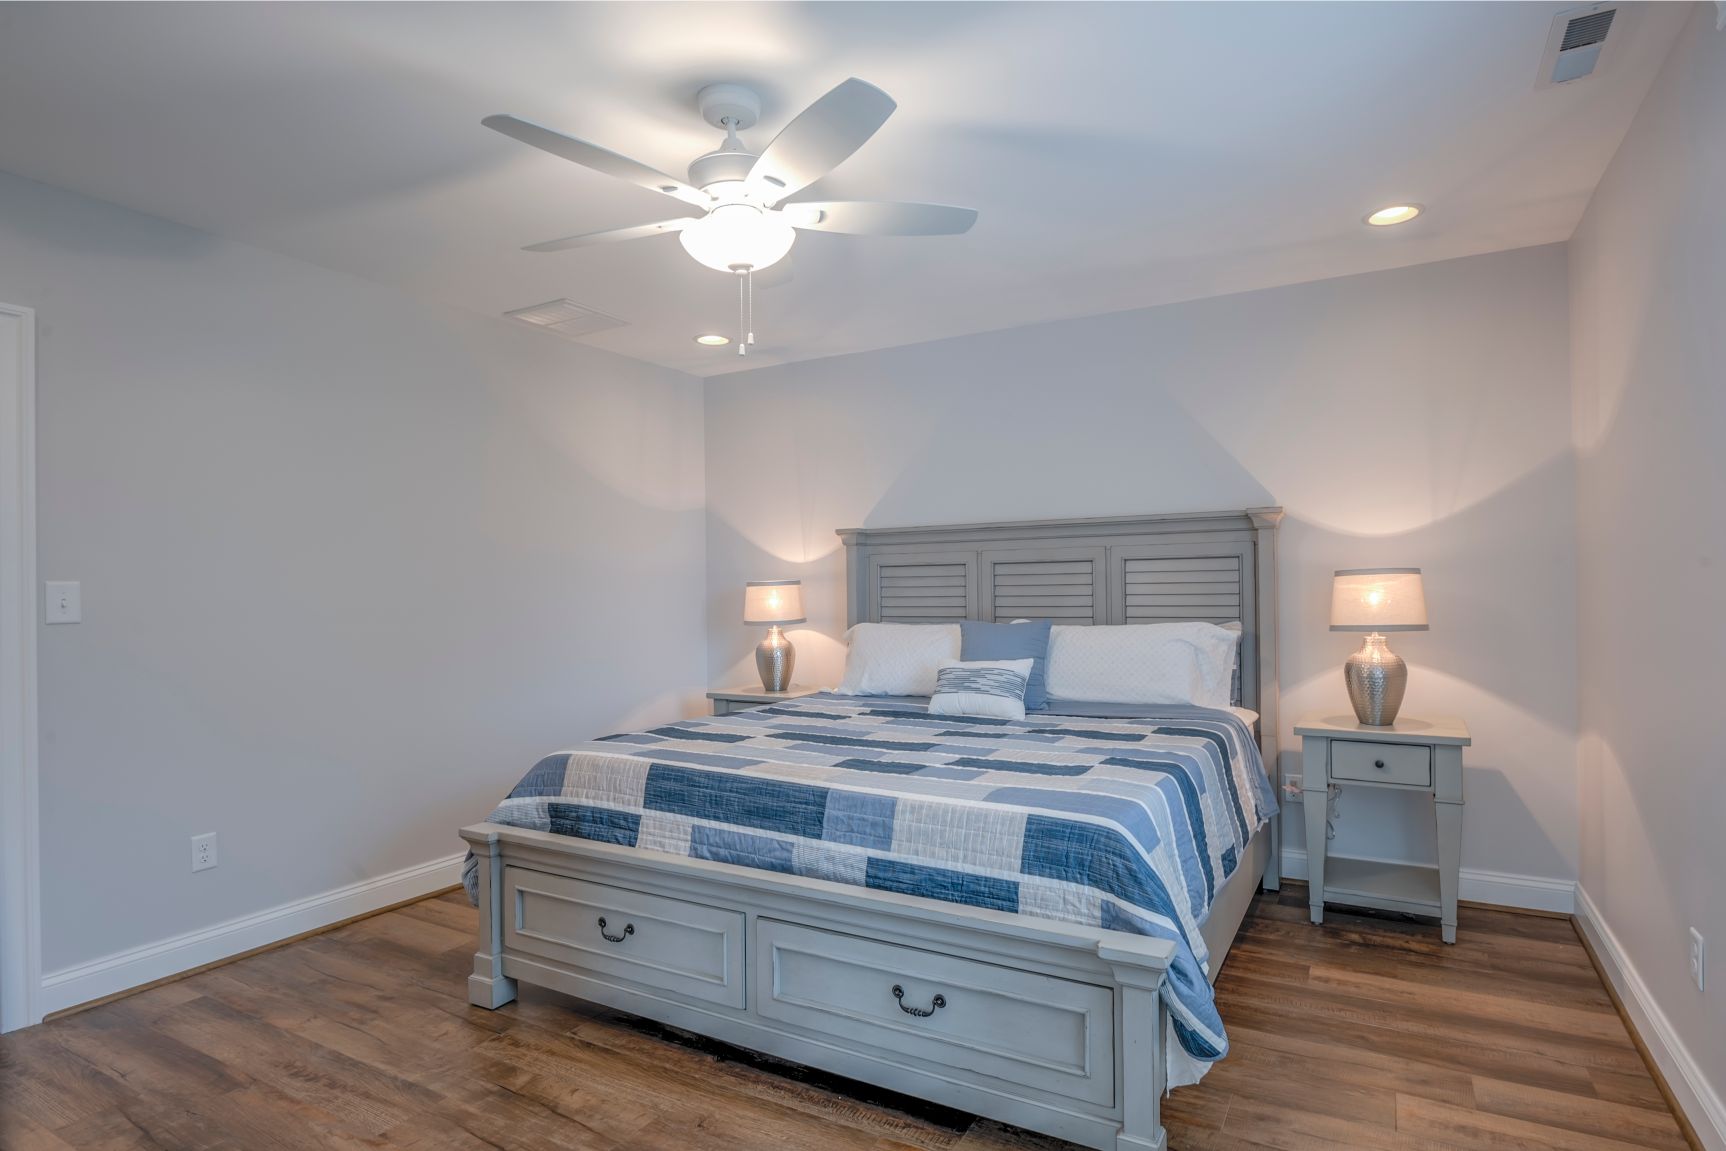 New Addition in October Glory, Ocean View DE - Bedroom with White Ceiling Fan